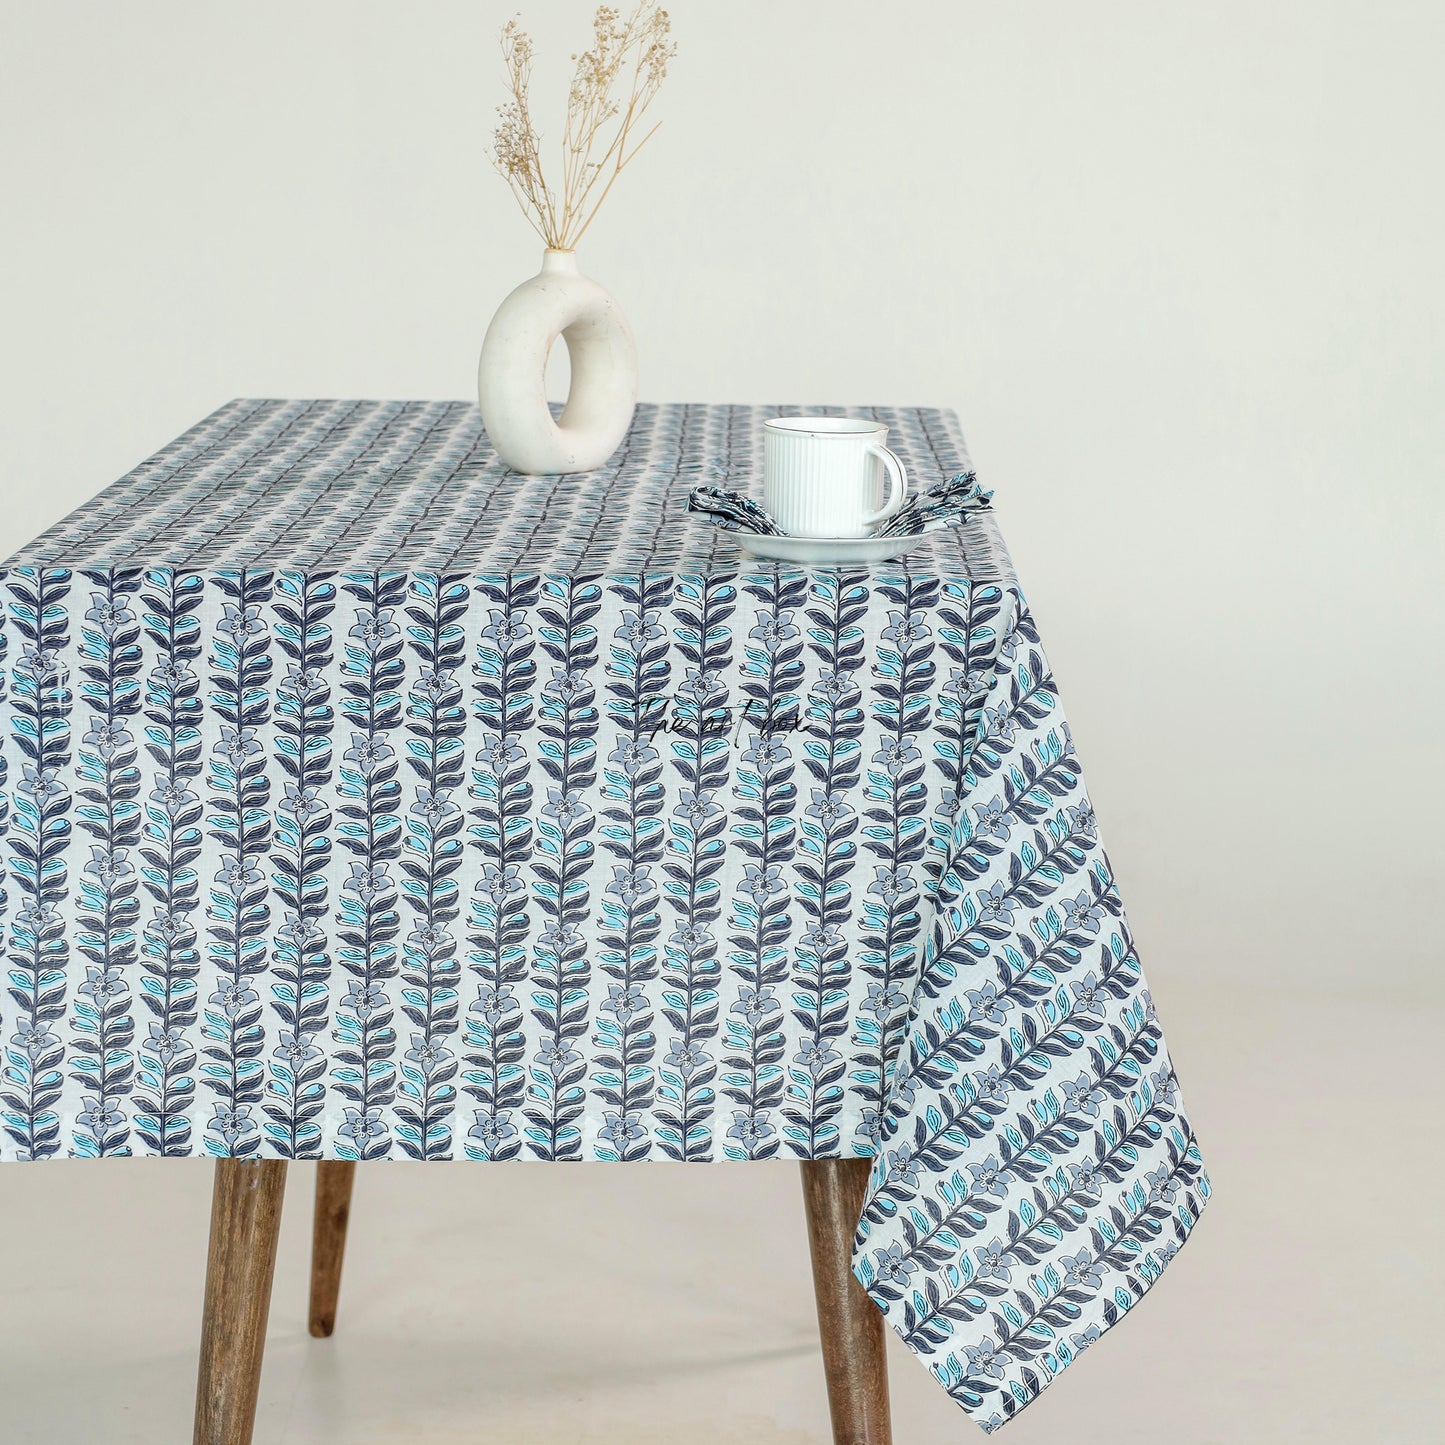 Garden Whispers Printed Cotton Tablecloth Beauty